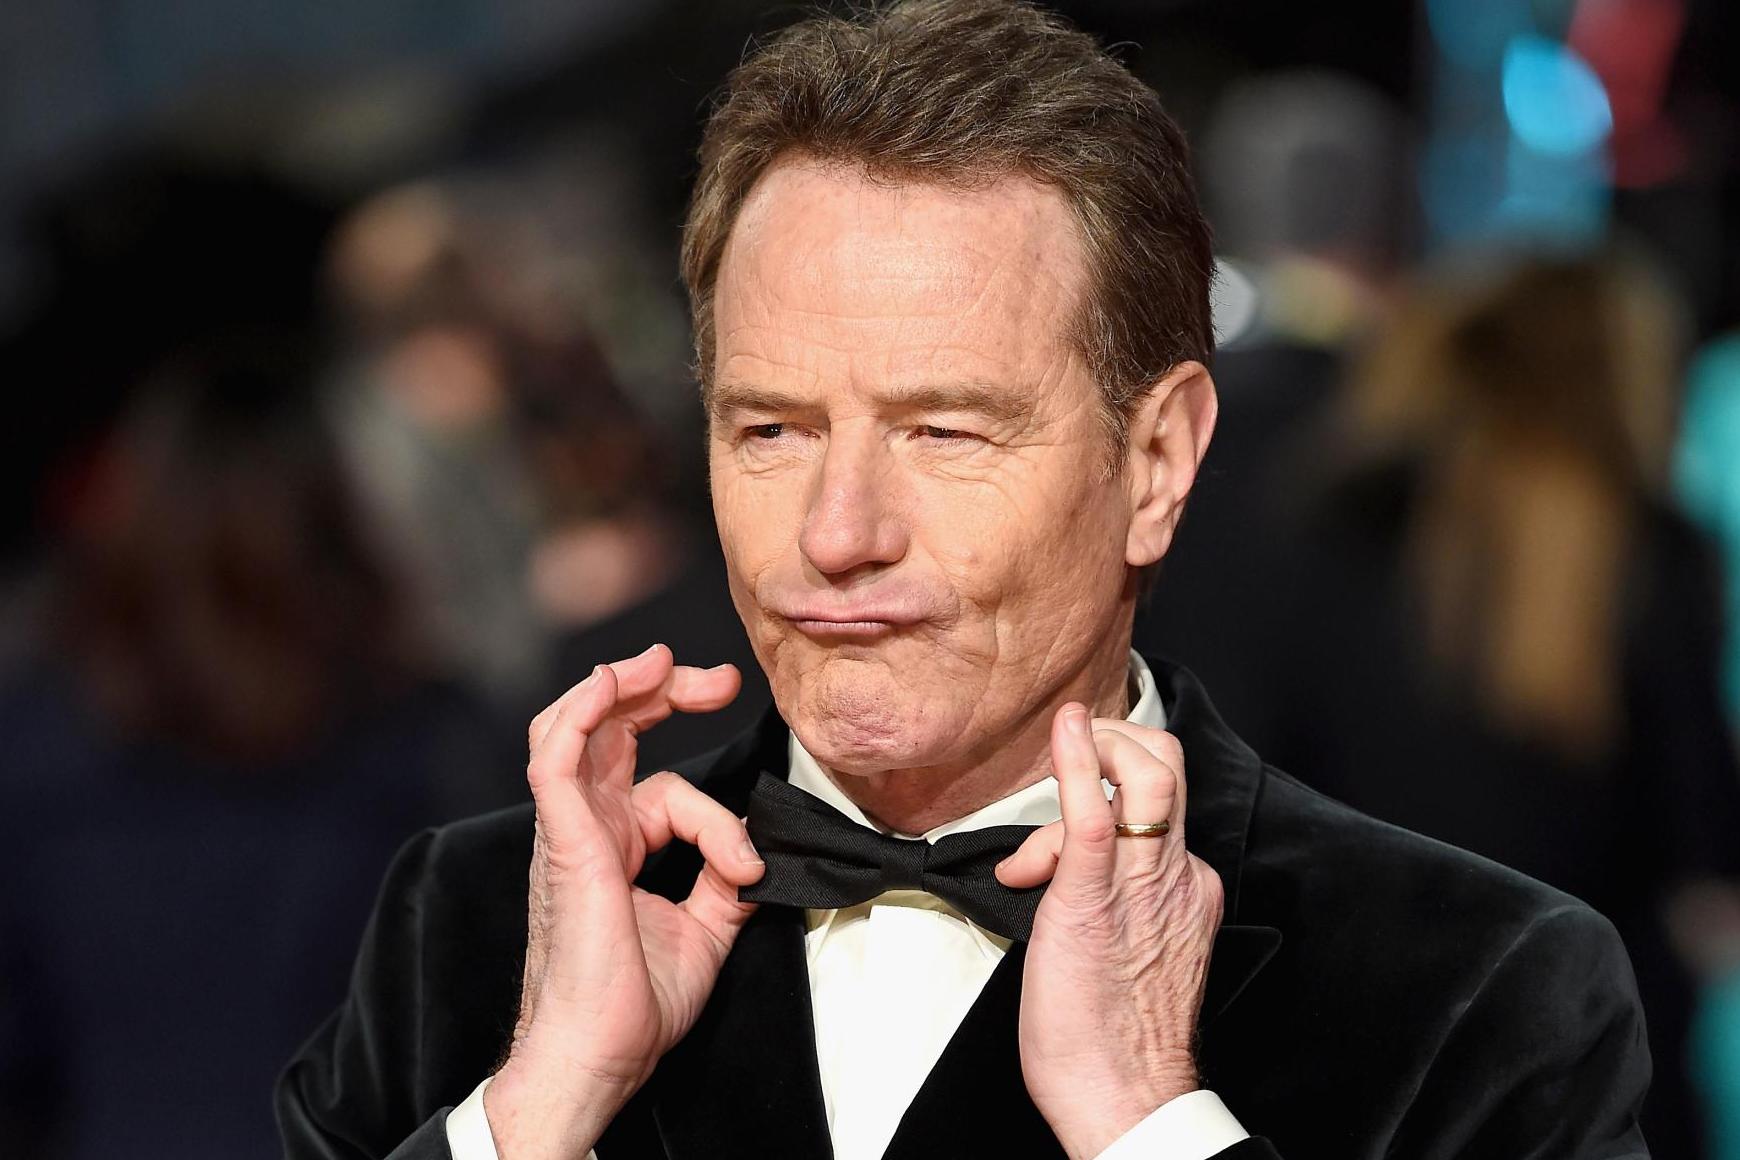 Bryan Cranston does something amazing when he goes to the airport - The indy100